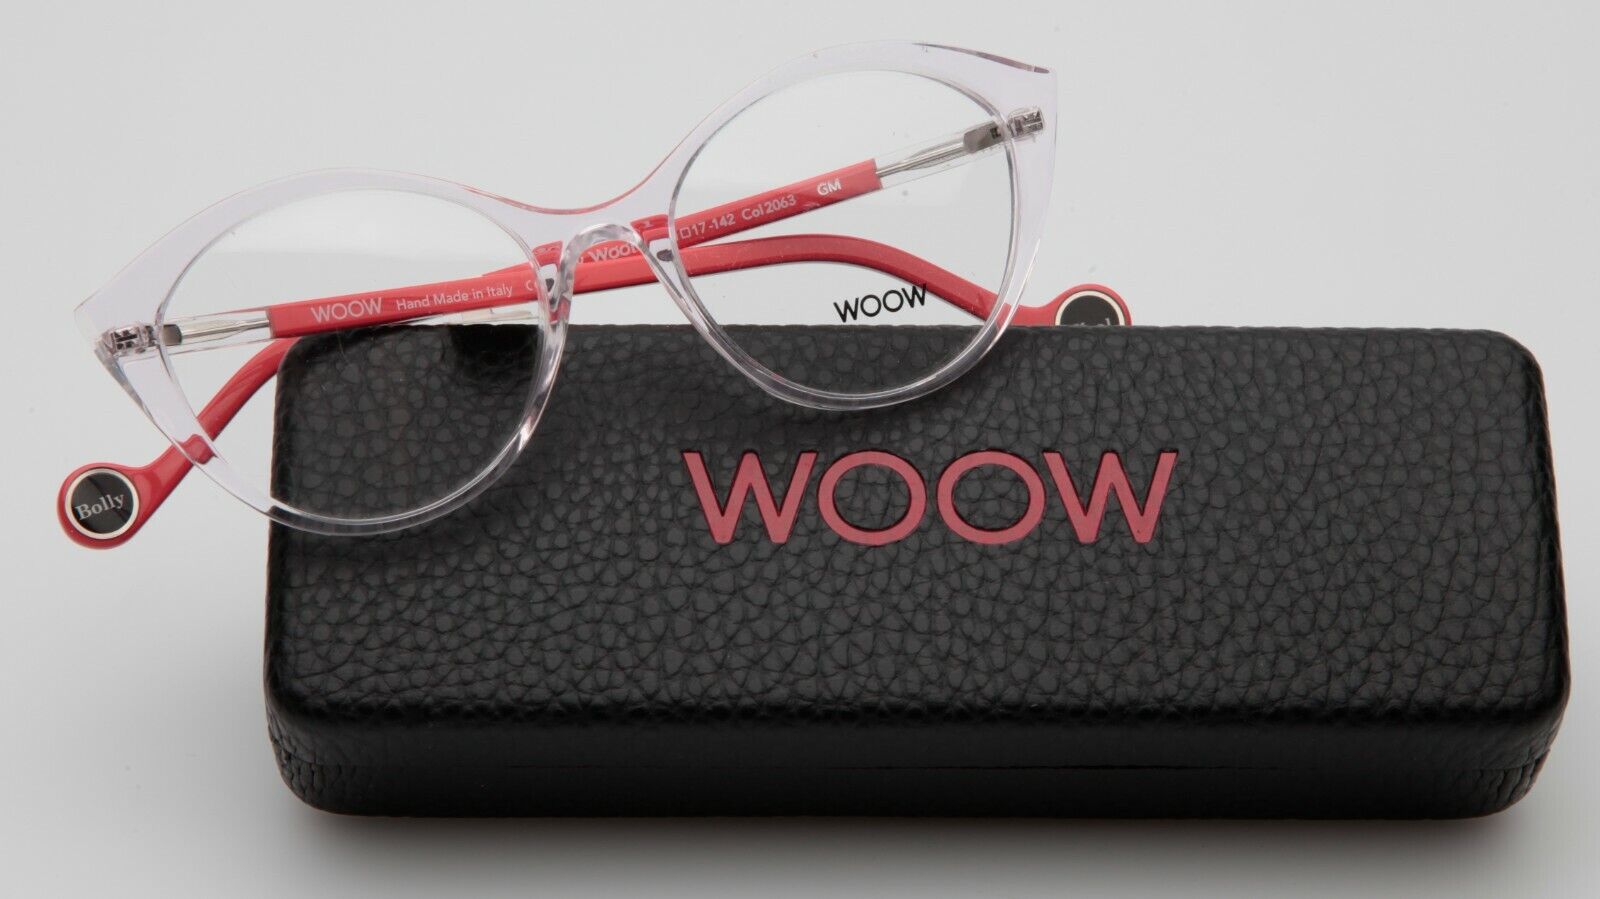 NEW WOOW Bolly Wool 1 Col 2063 Pink Cristal EYEGLASSES FRAME 51-17-142 B43mm